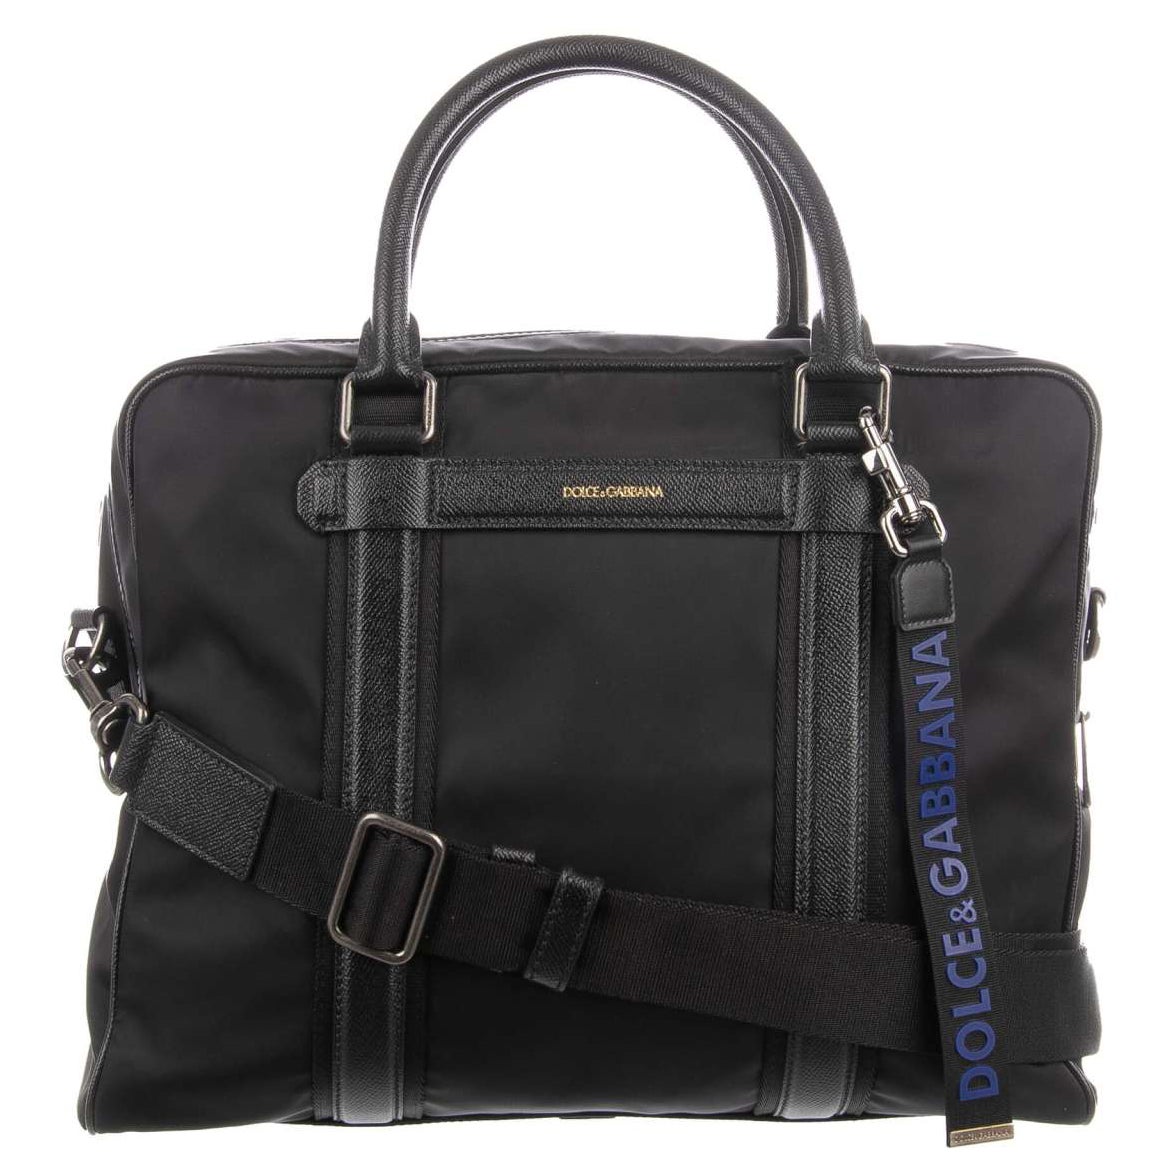 Dolce & Gabbana - Large Nylon Briefcase Bag with Logo Pendant and Pockets Black For Sale